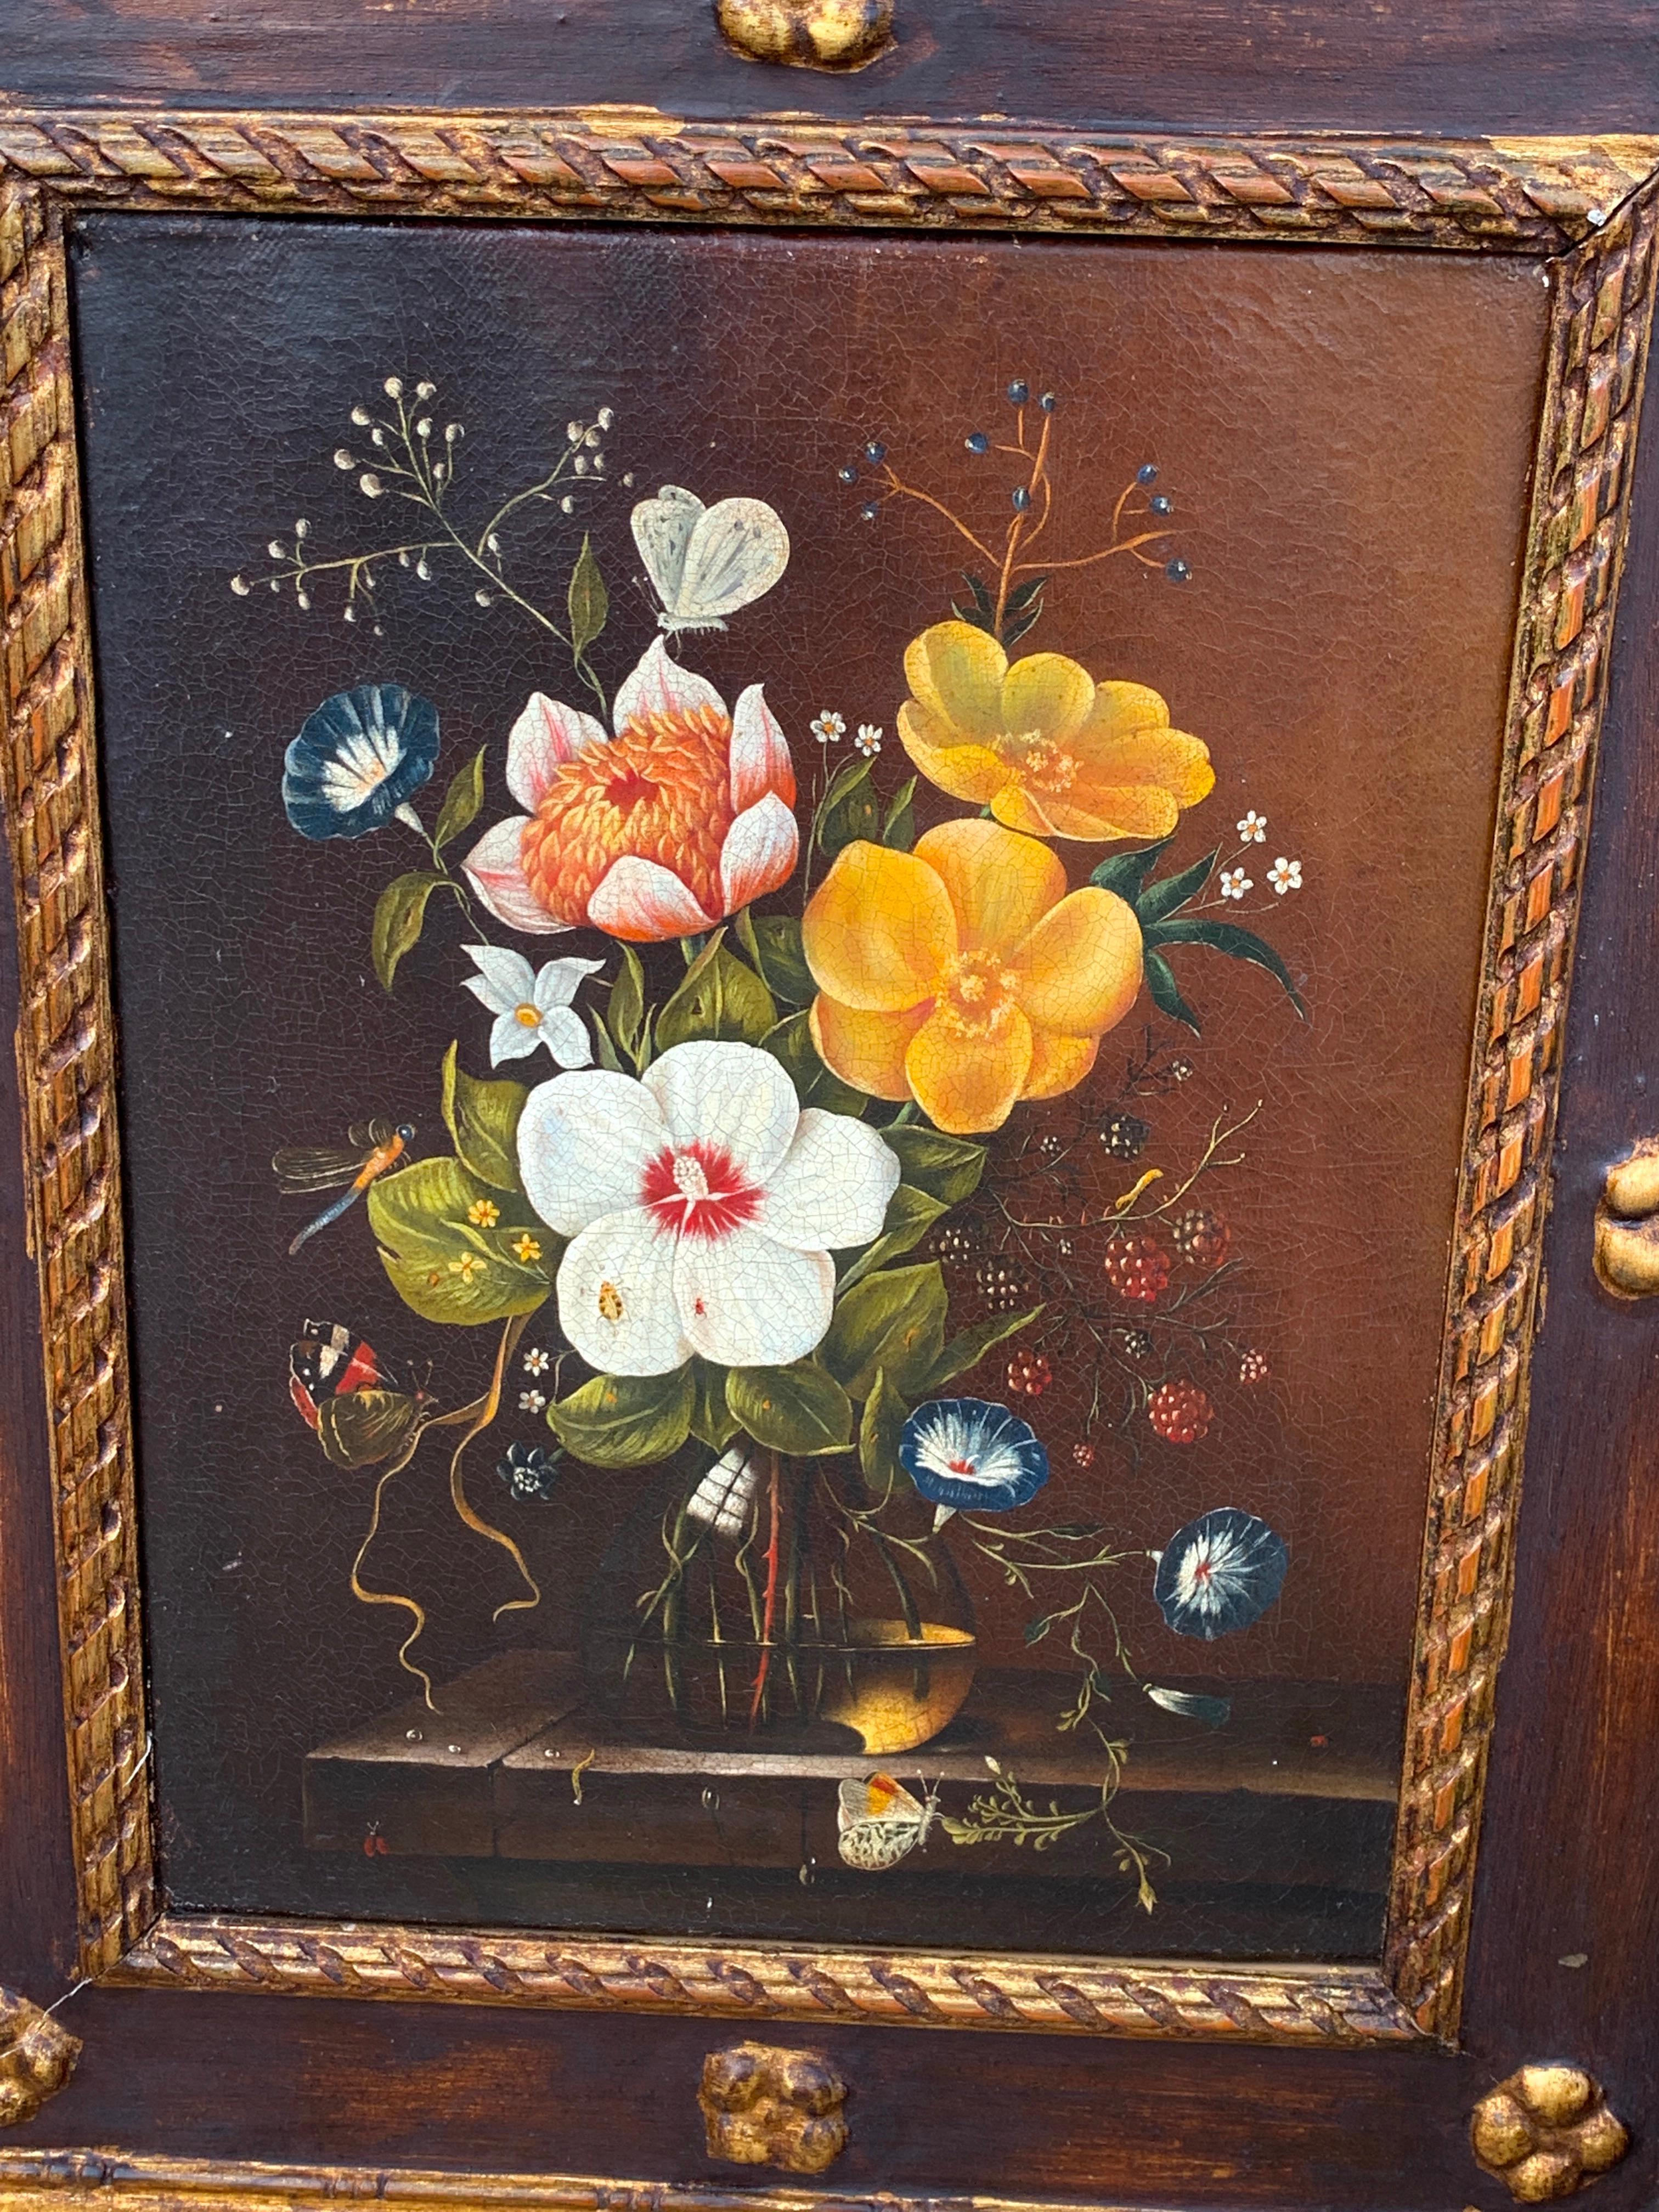 Pair of English floral still life paintings in the style of Cecil Kennedy
Each one realistically painted in the style of framed British Artist Cecil Kennedy, British, 1905-1997 with specimen flowers and assorted butterflies and insects.